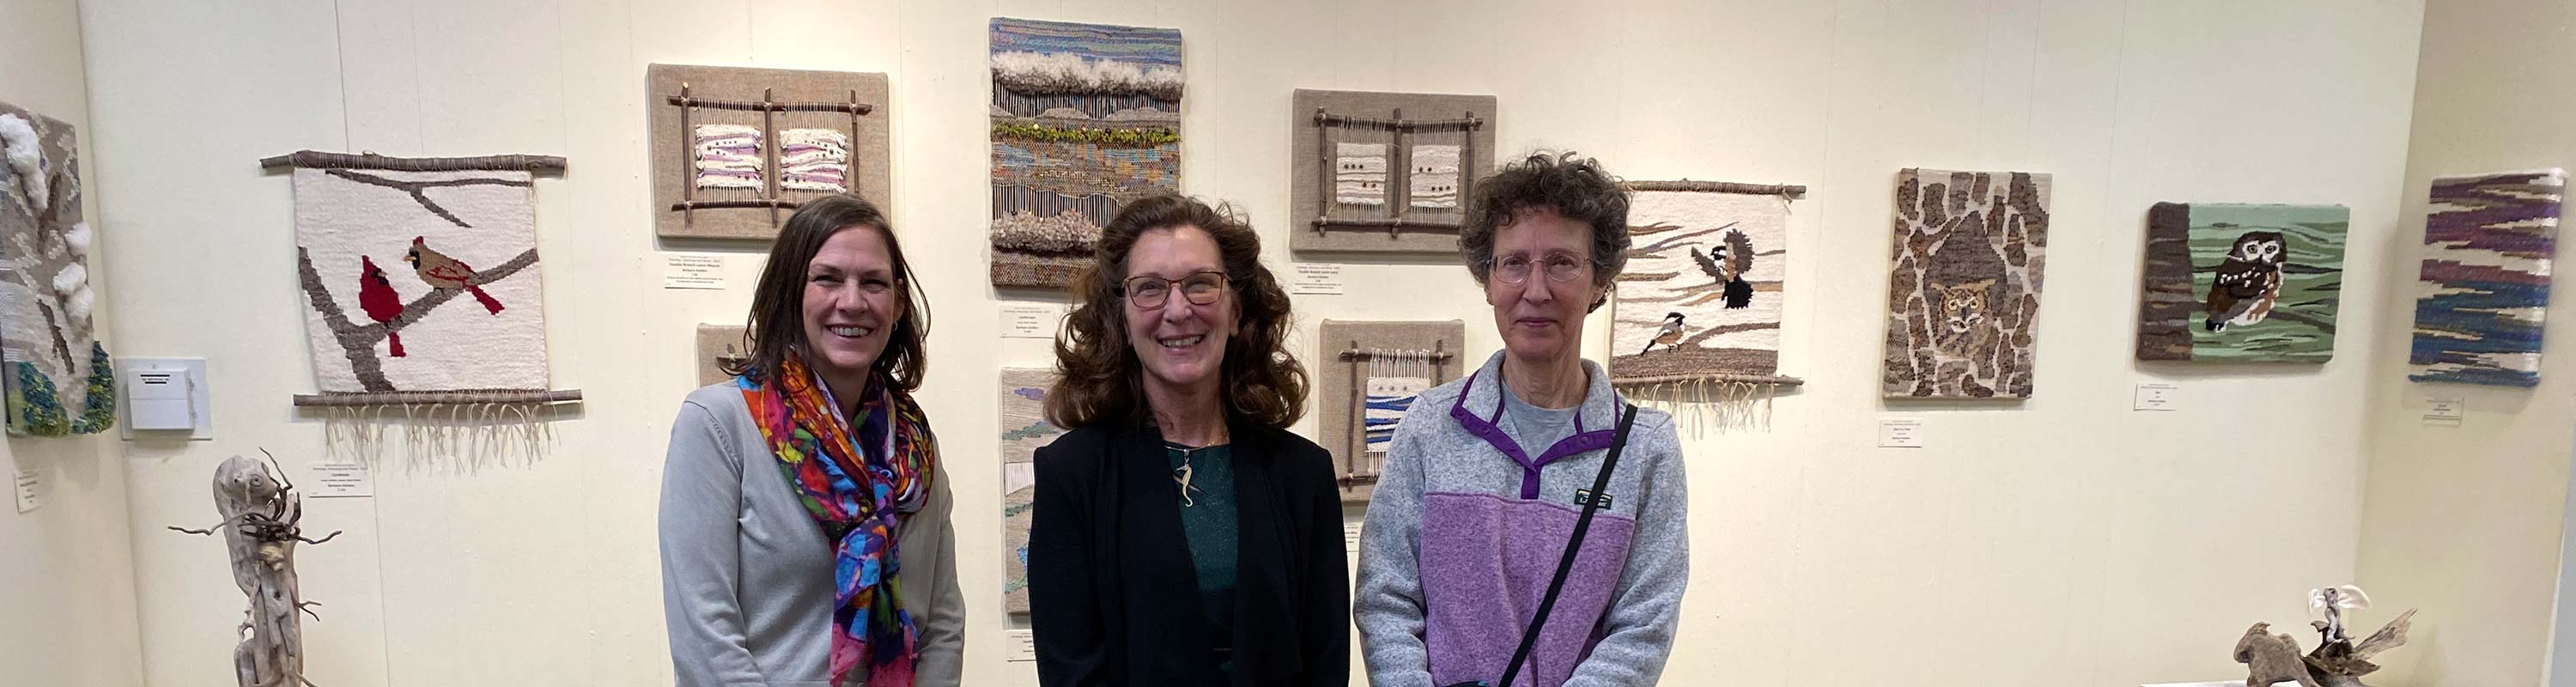 the three artists whose work is shown in the current show: Paintings, Weavings, and Wood